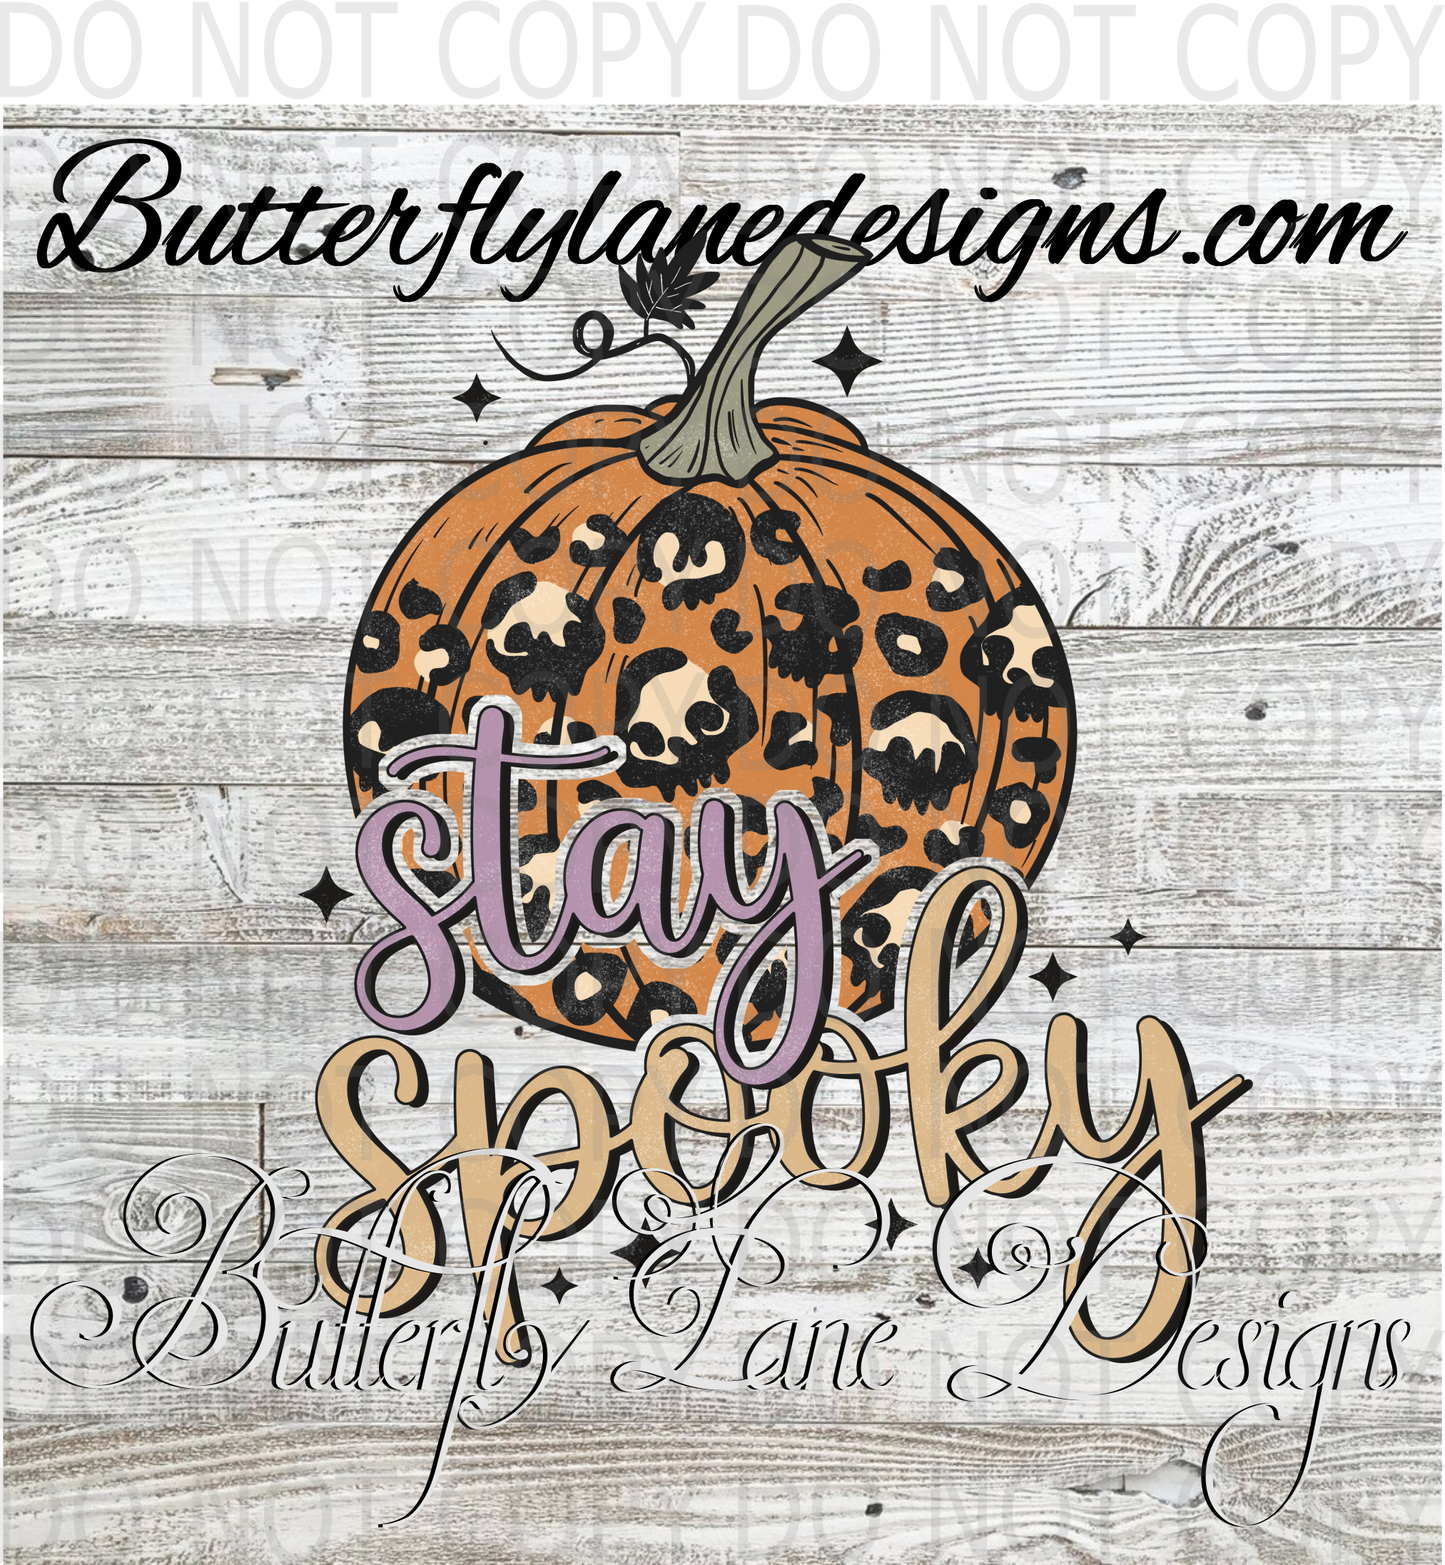 Stay spooky :: Clear Decal :: VC Decal